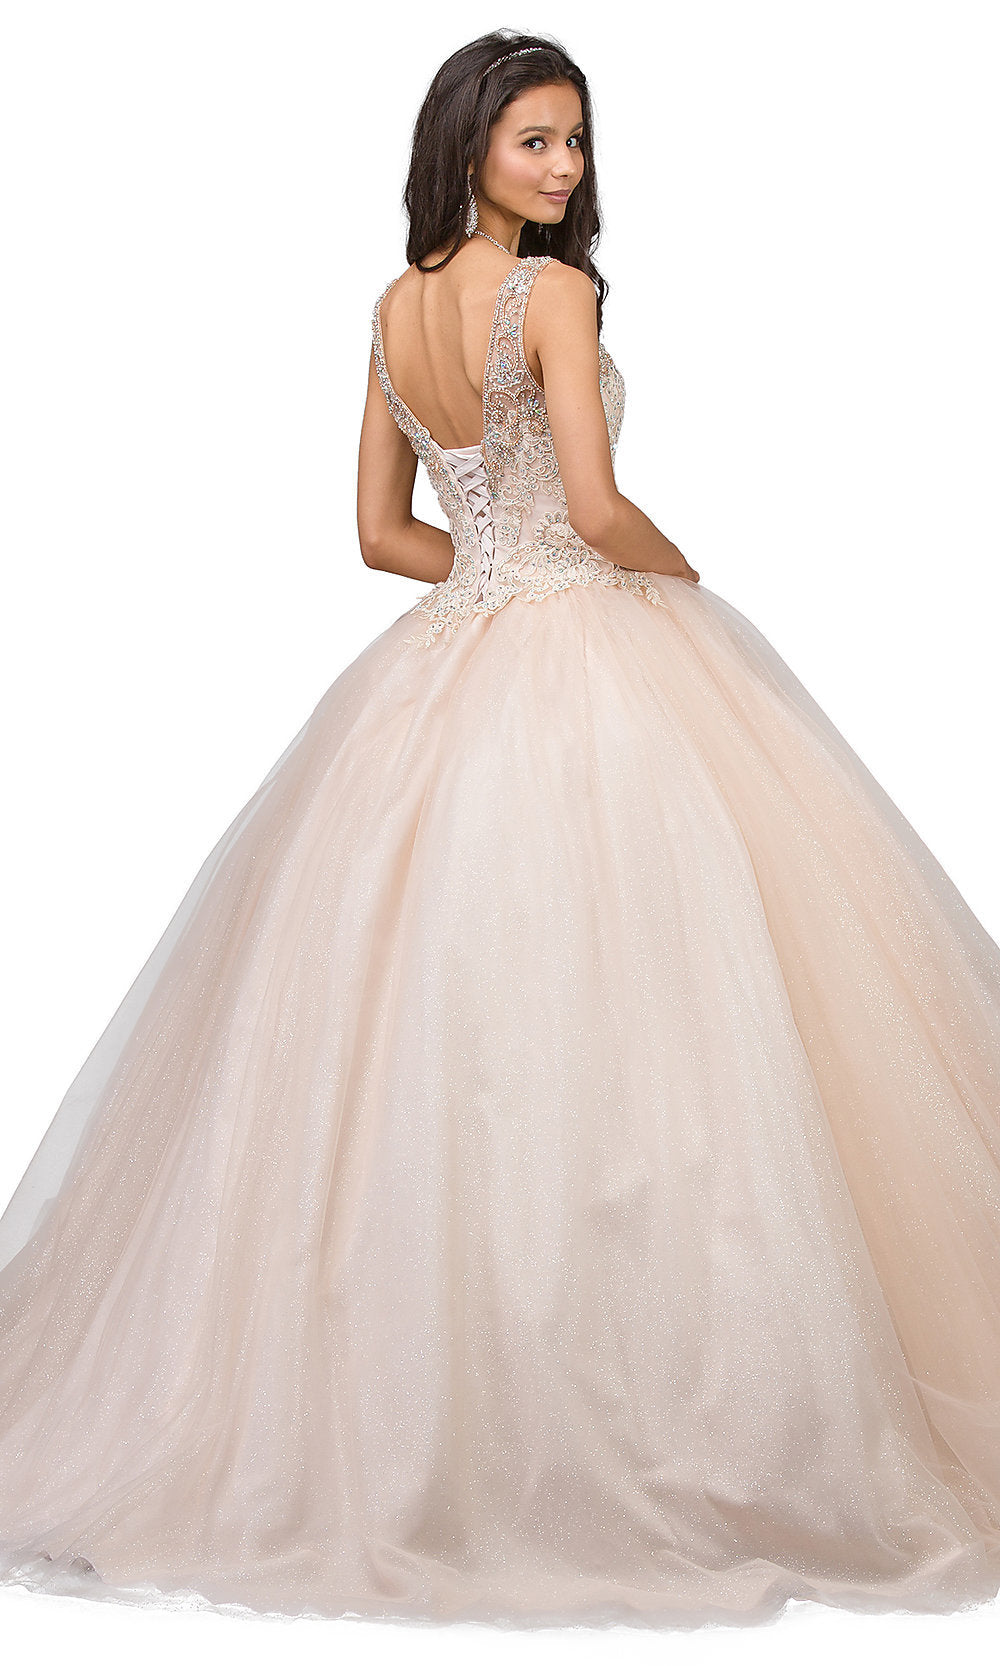  Champagne Ball-Gown-Style Long Quinceanera Dress